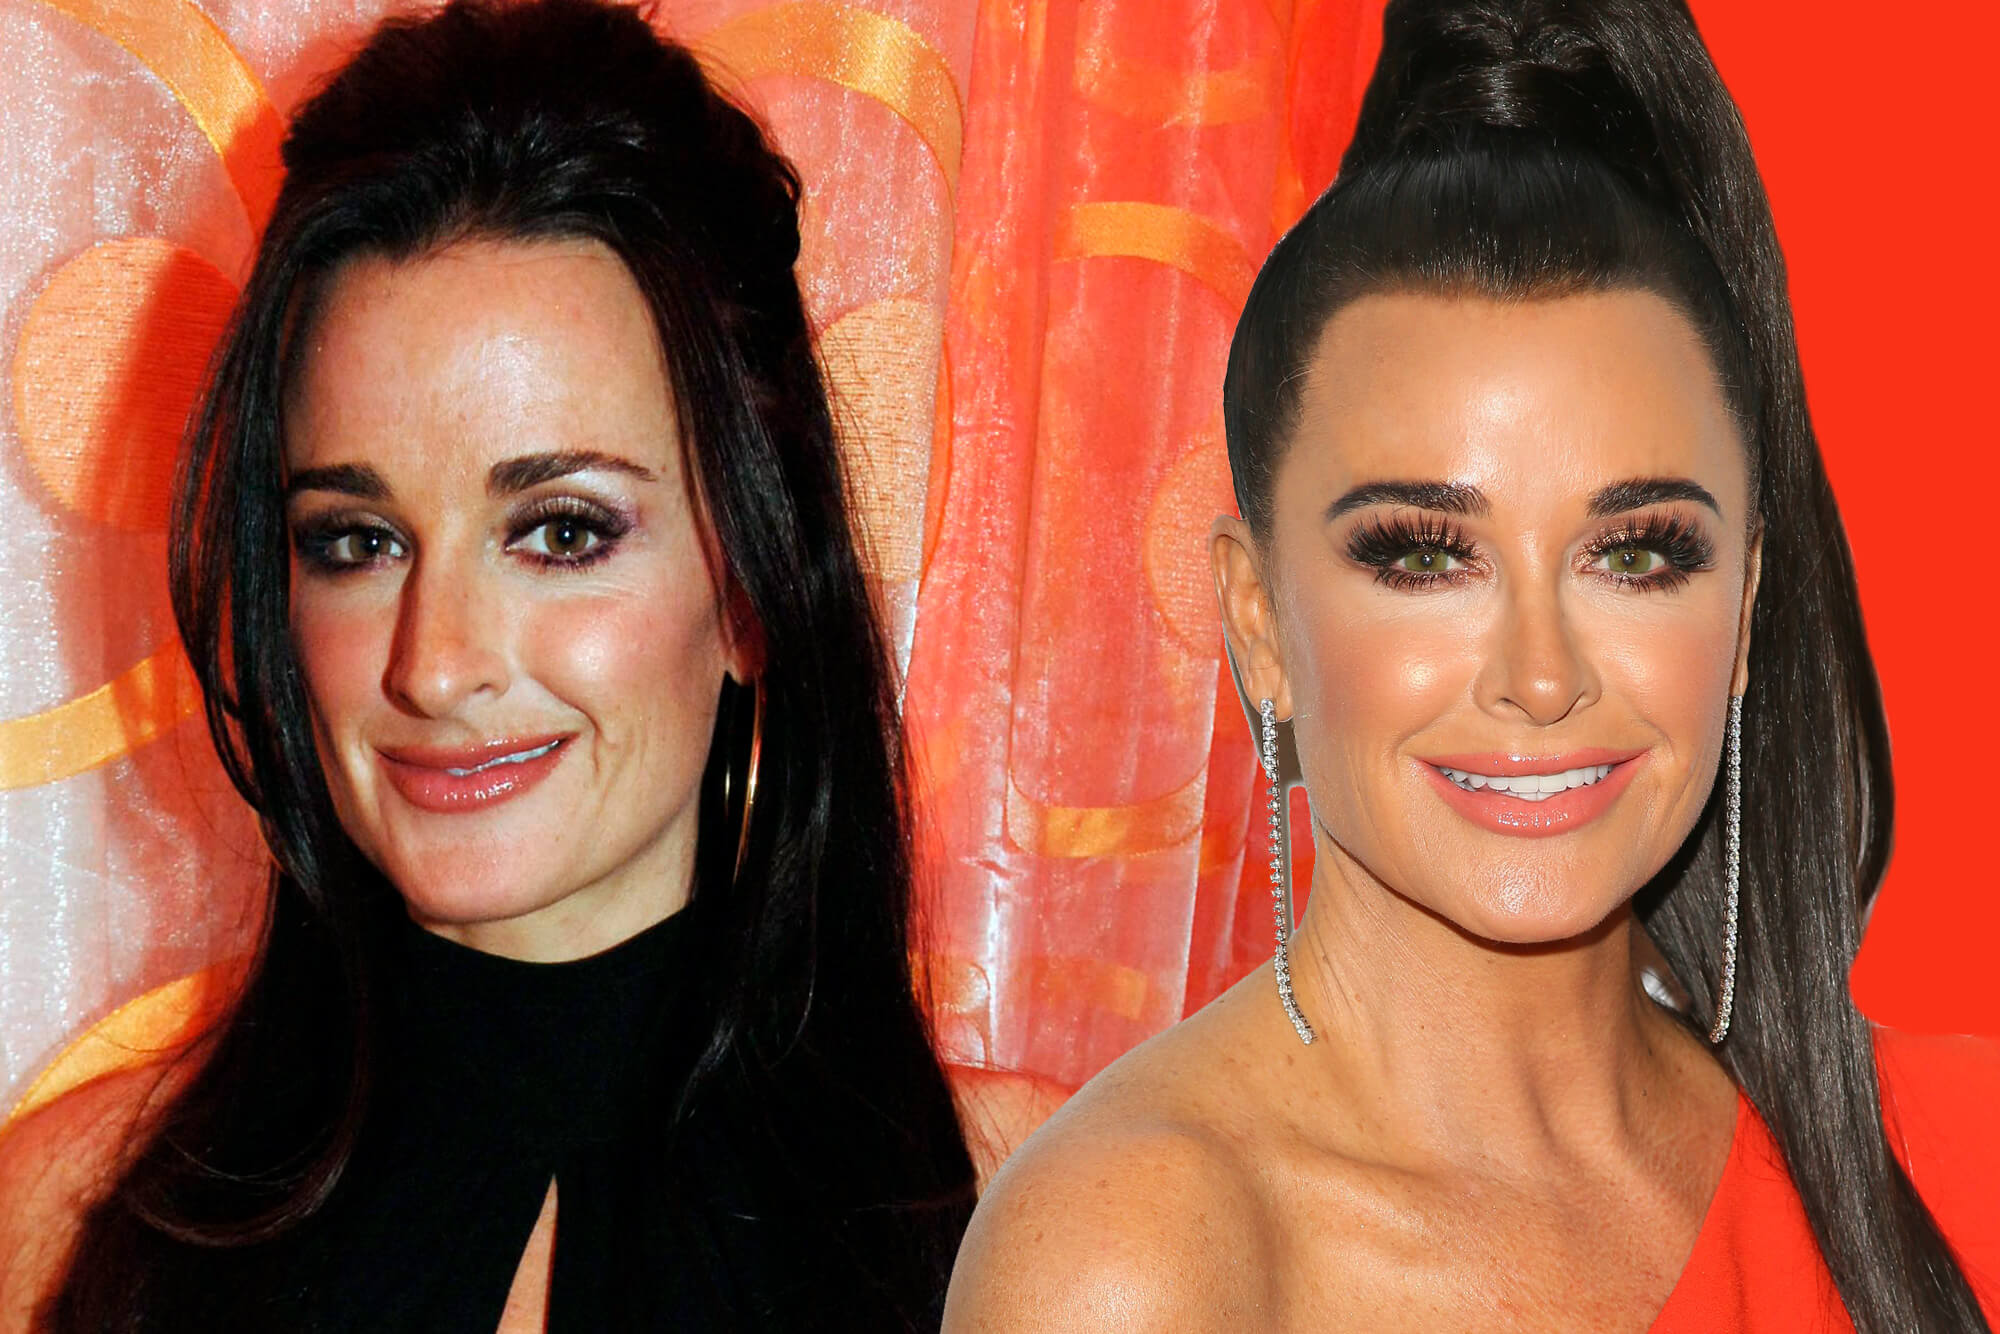 Kyle richards before and after veneers